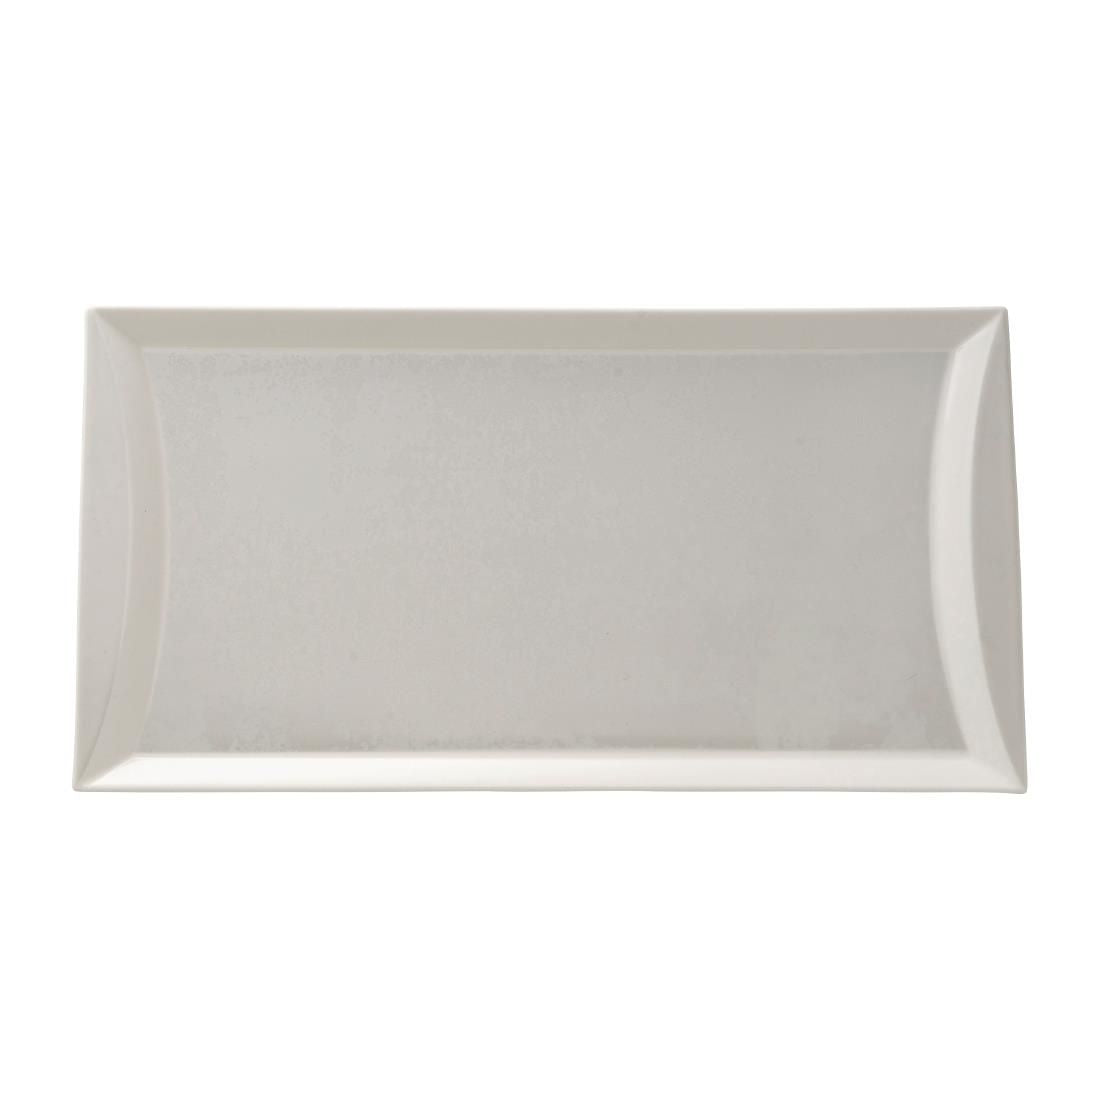 FE139 Royal Crown Derby Crushed Velvet Pearl Rectangle Tray 320x160mm (Pack of 6) JD Catering Equipment Solutions Ltd